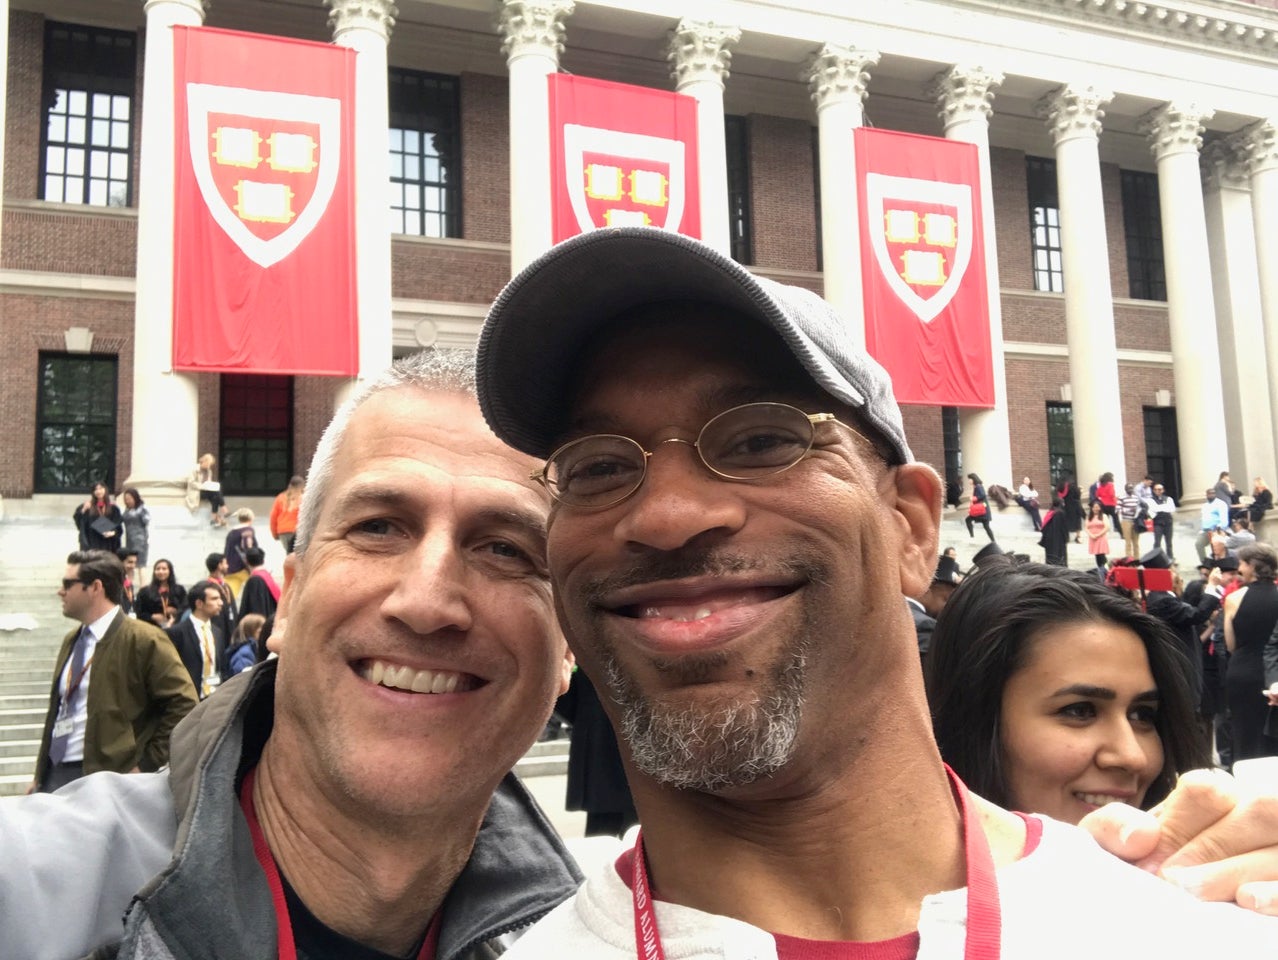 Christian Cooper '84 and his former roommate, Michael M. Phillips ’84, together at their 35th Reunion